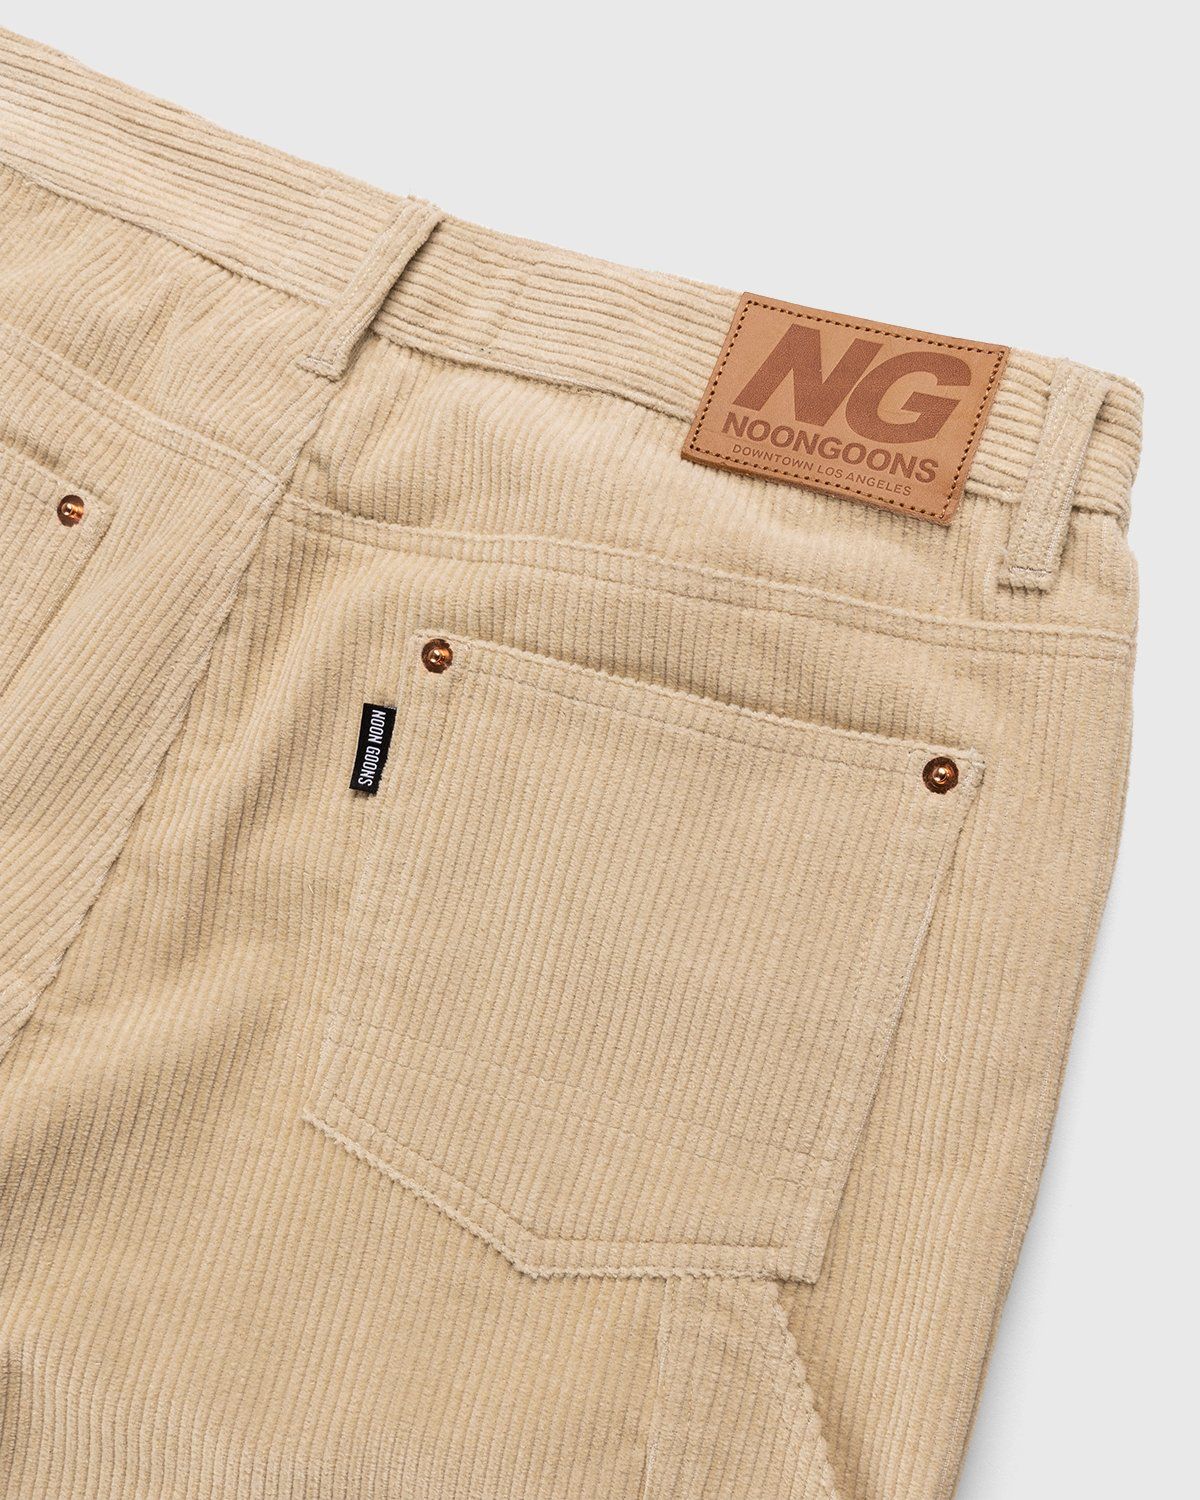 Noon Goons – Sublime Cord Short Overcast - Shorts - Beige - Image 6